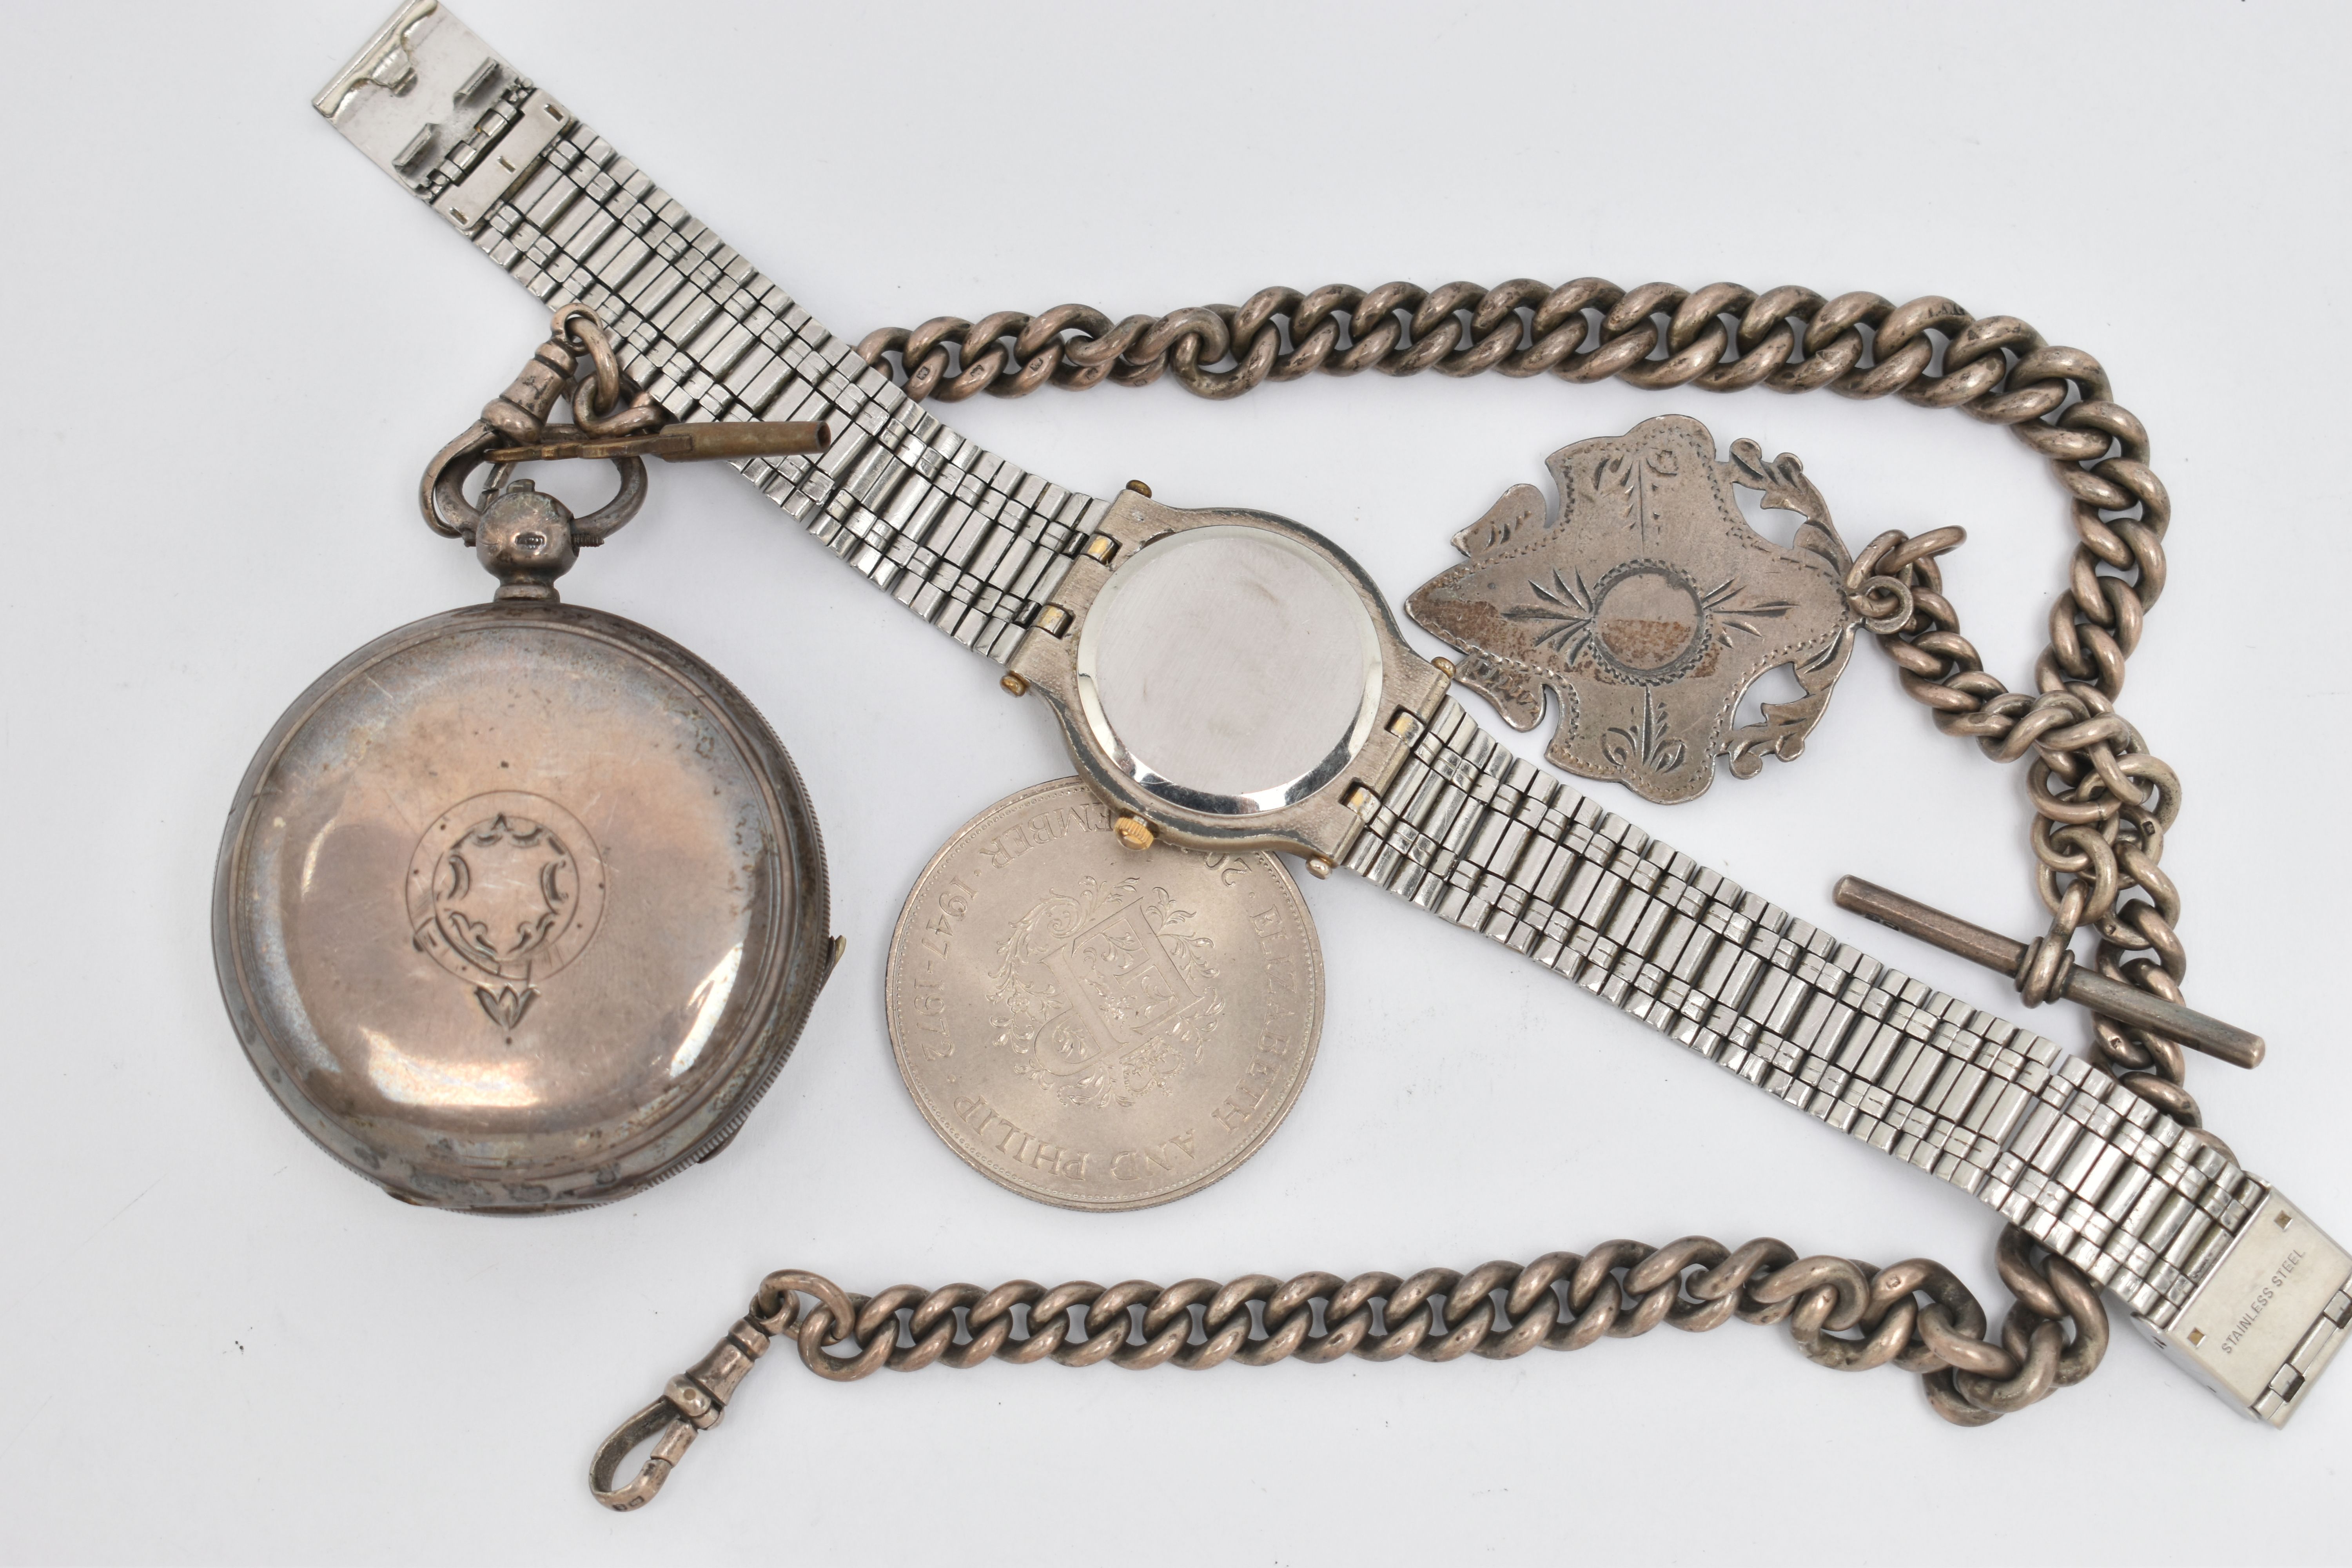 A SILVER 'WALTHAM' POCKET WATCH AND ALBERT CHAIN, key wound, open face pocket watch, round white - Image 3 of 4